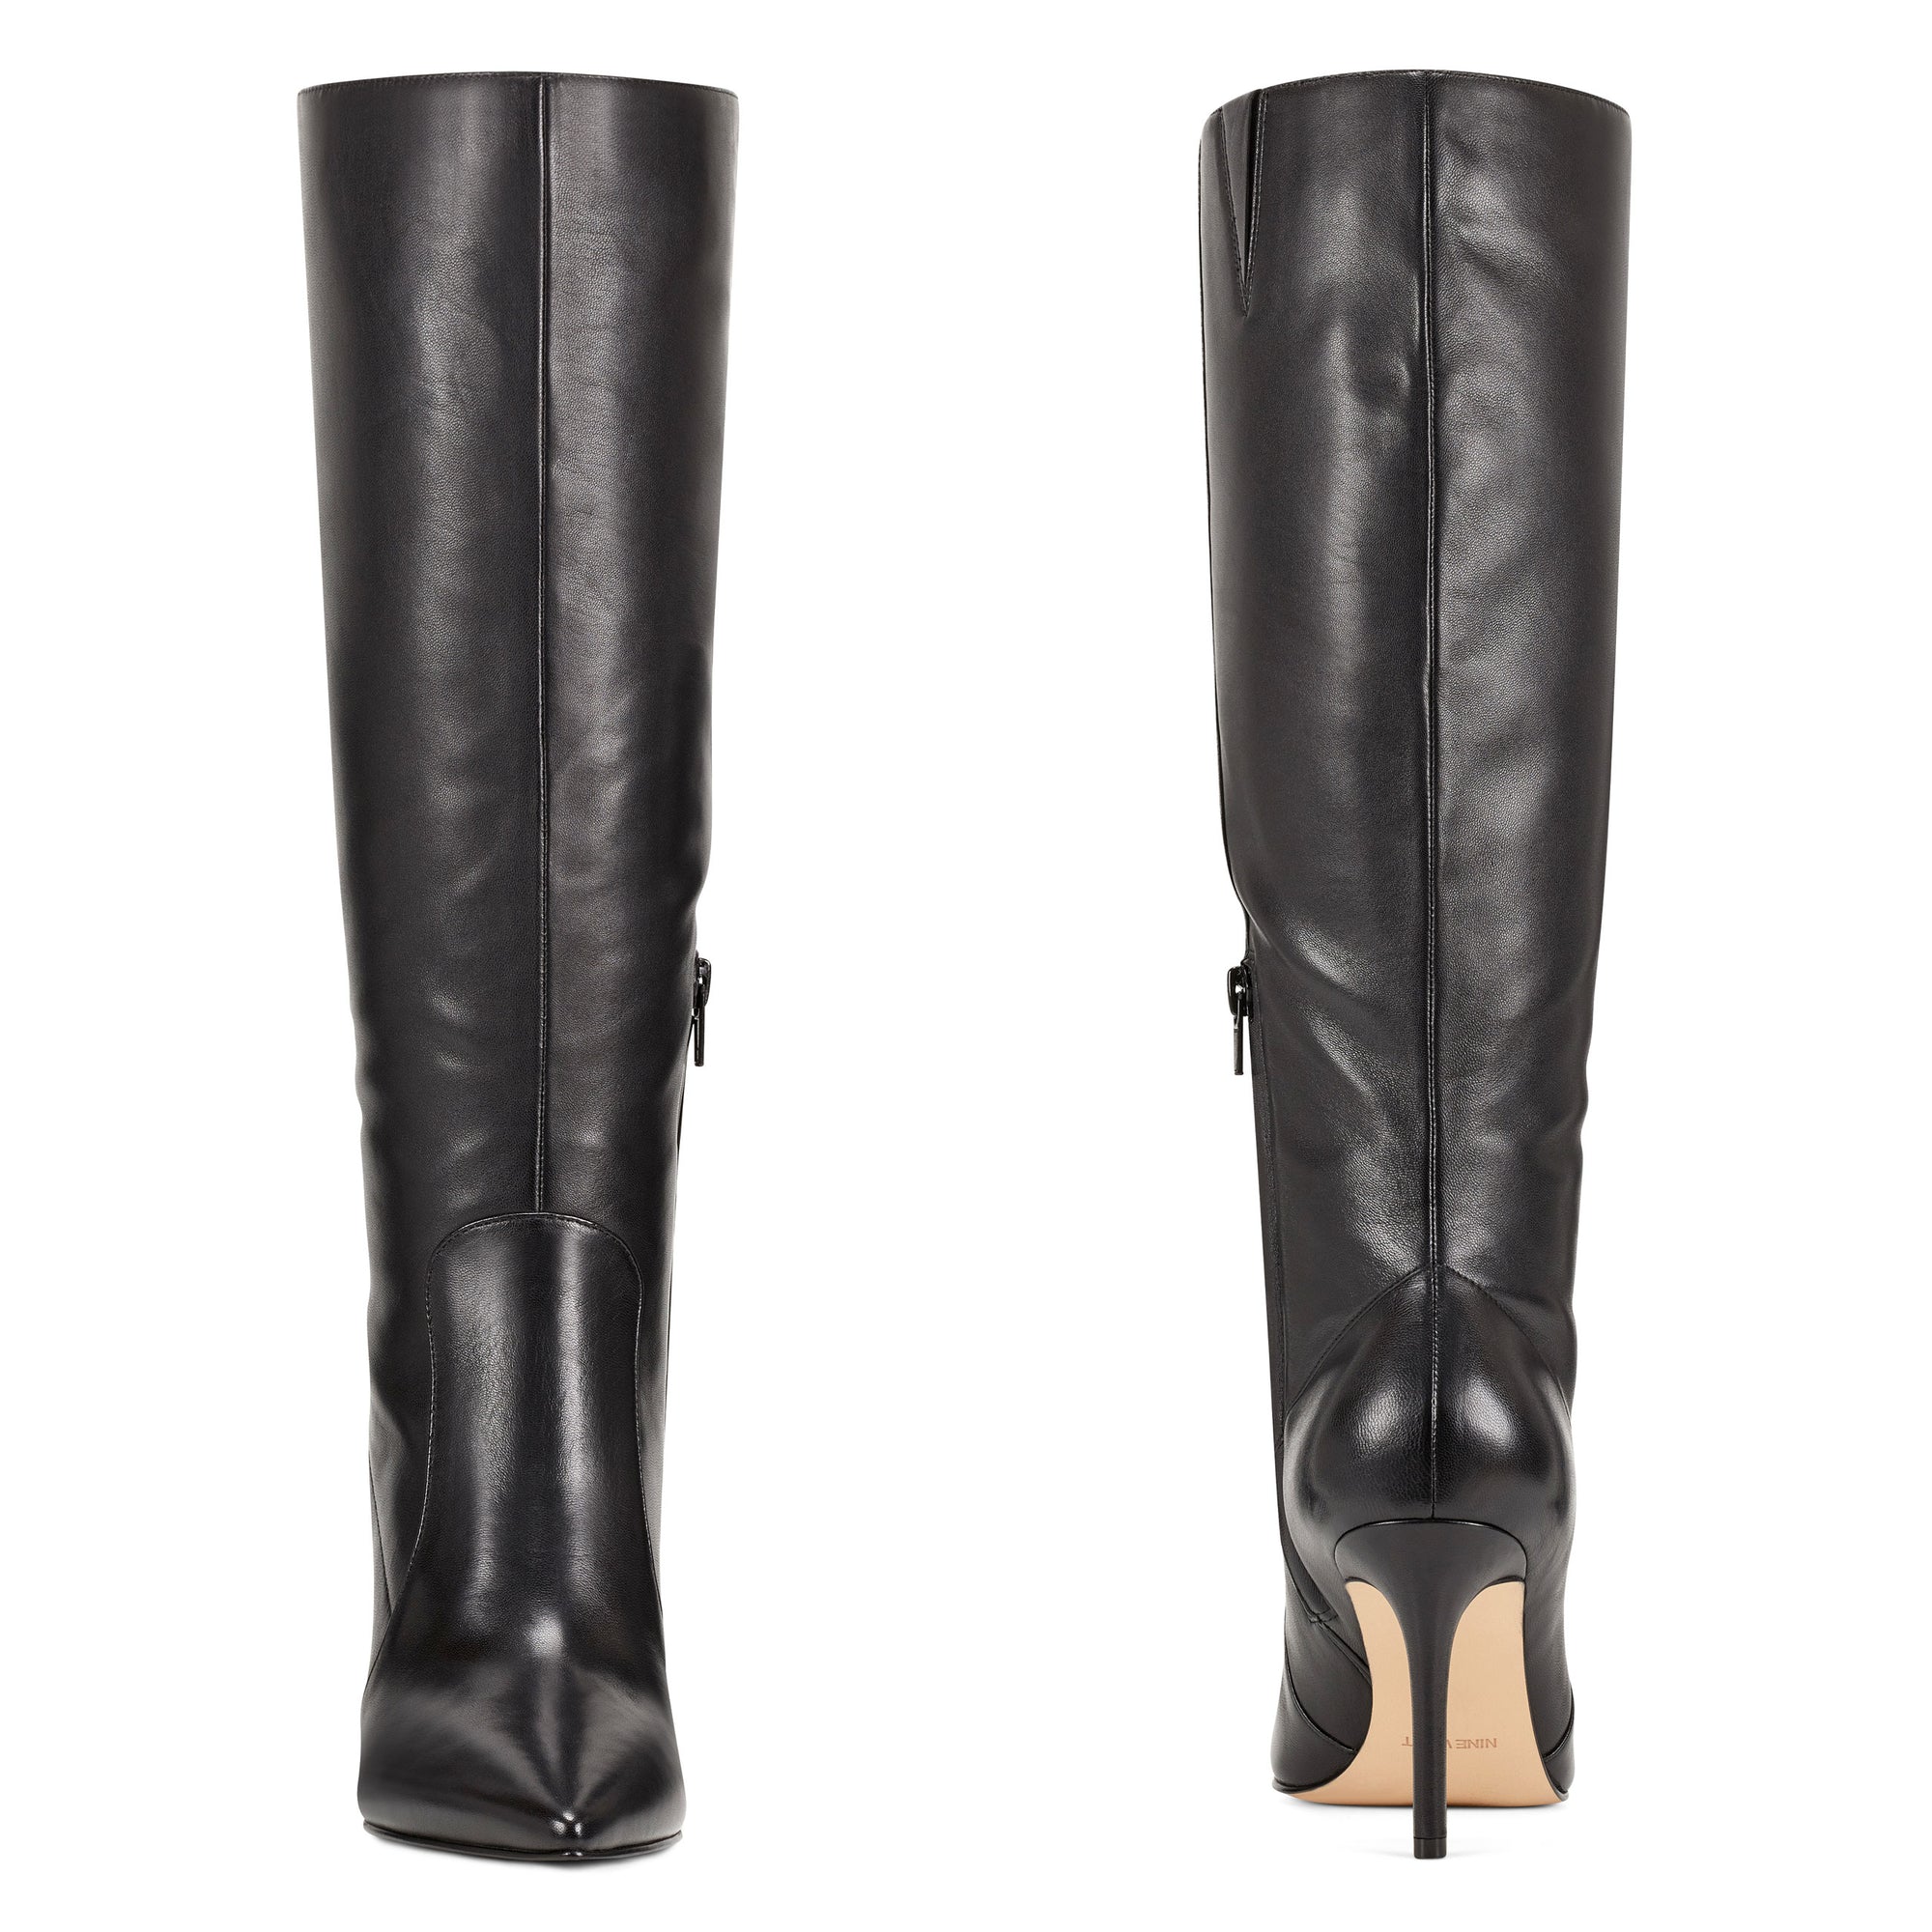 Fivera Pointy Toe Boot - Nine West